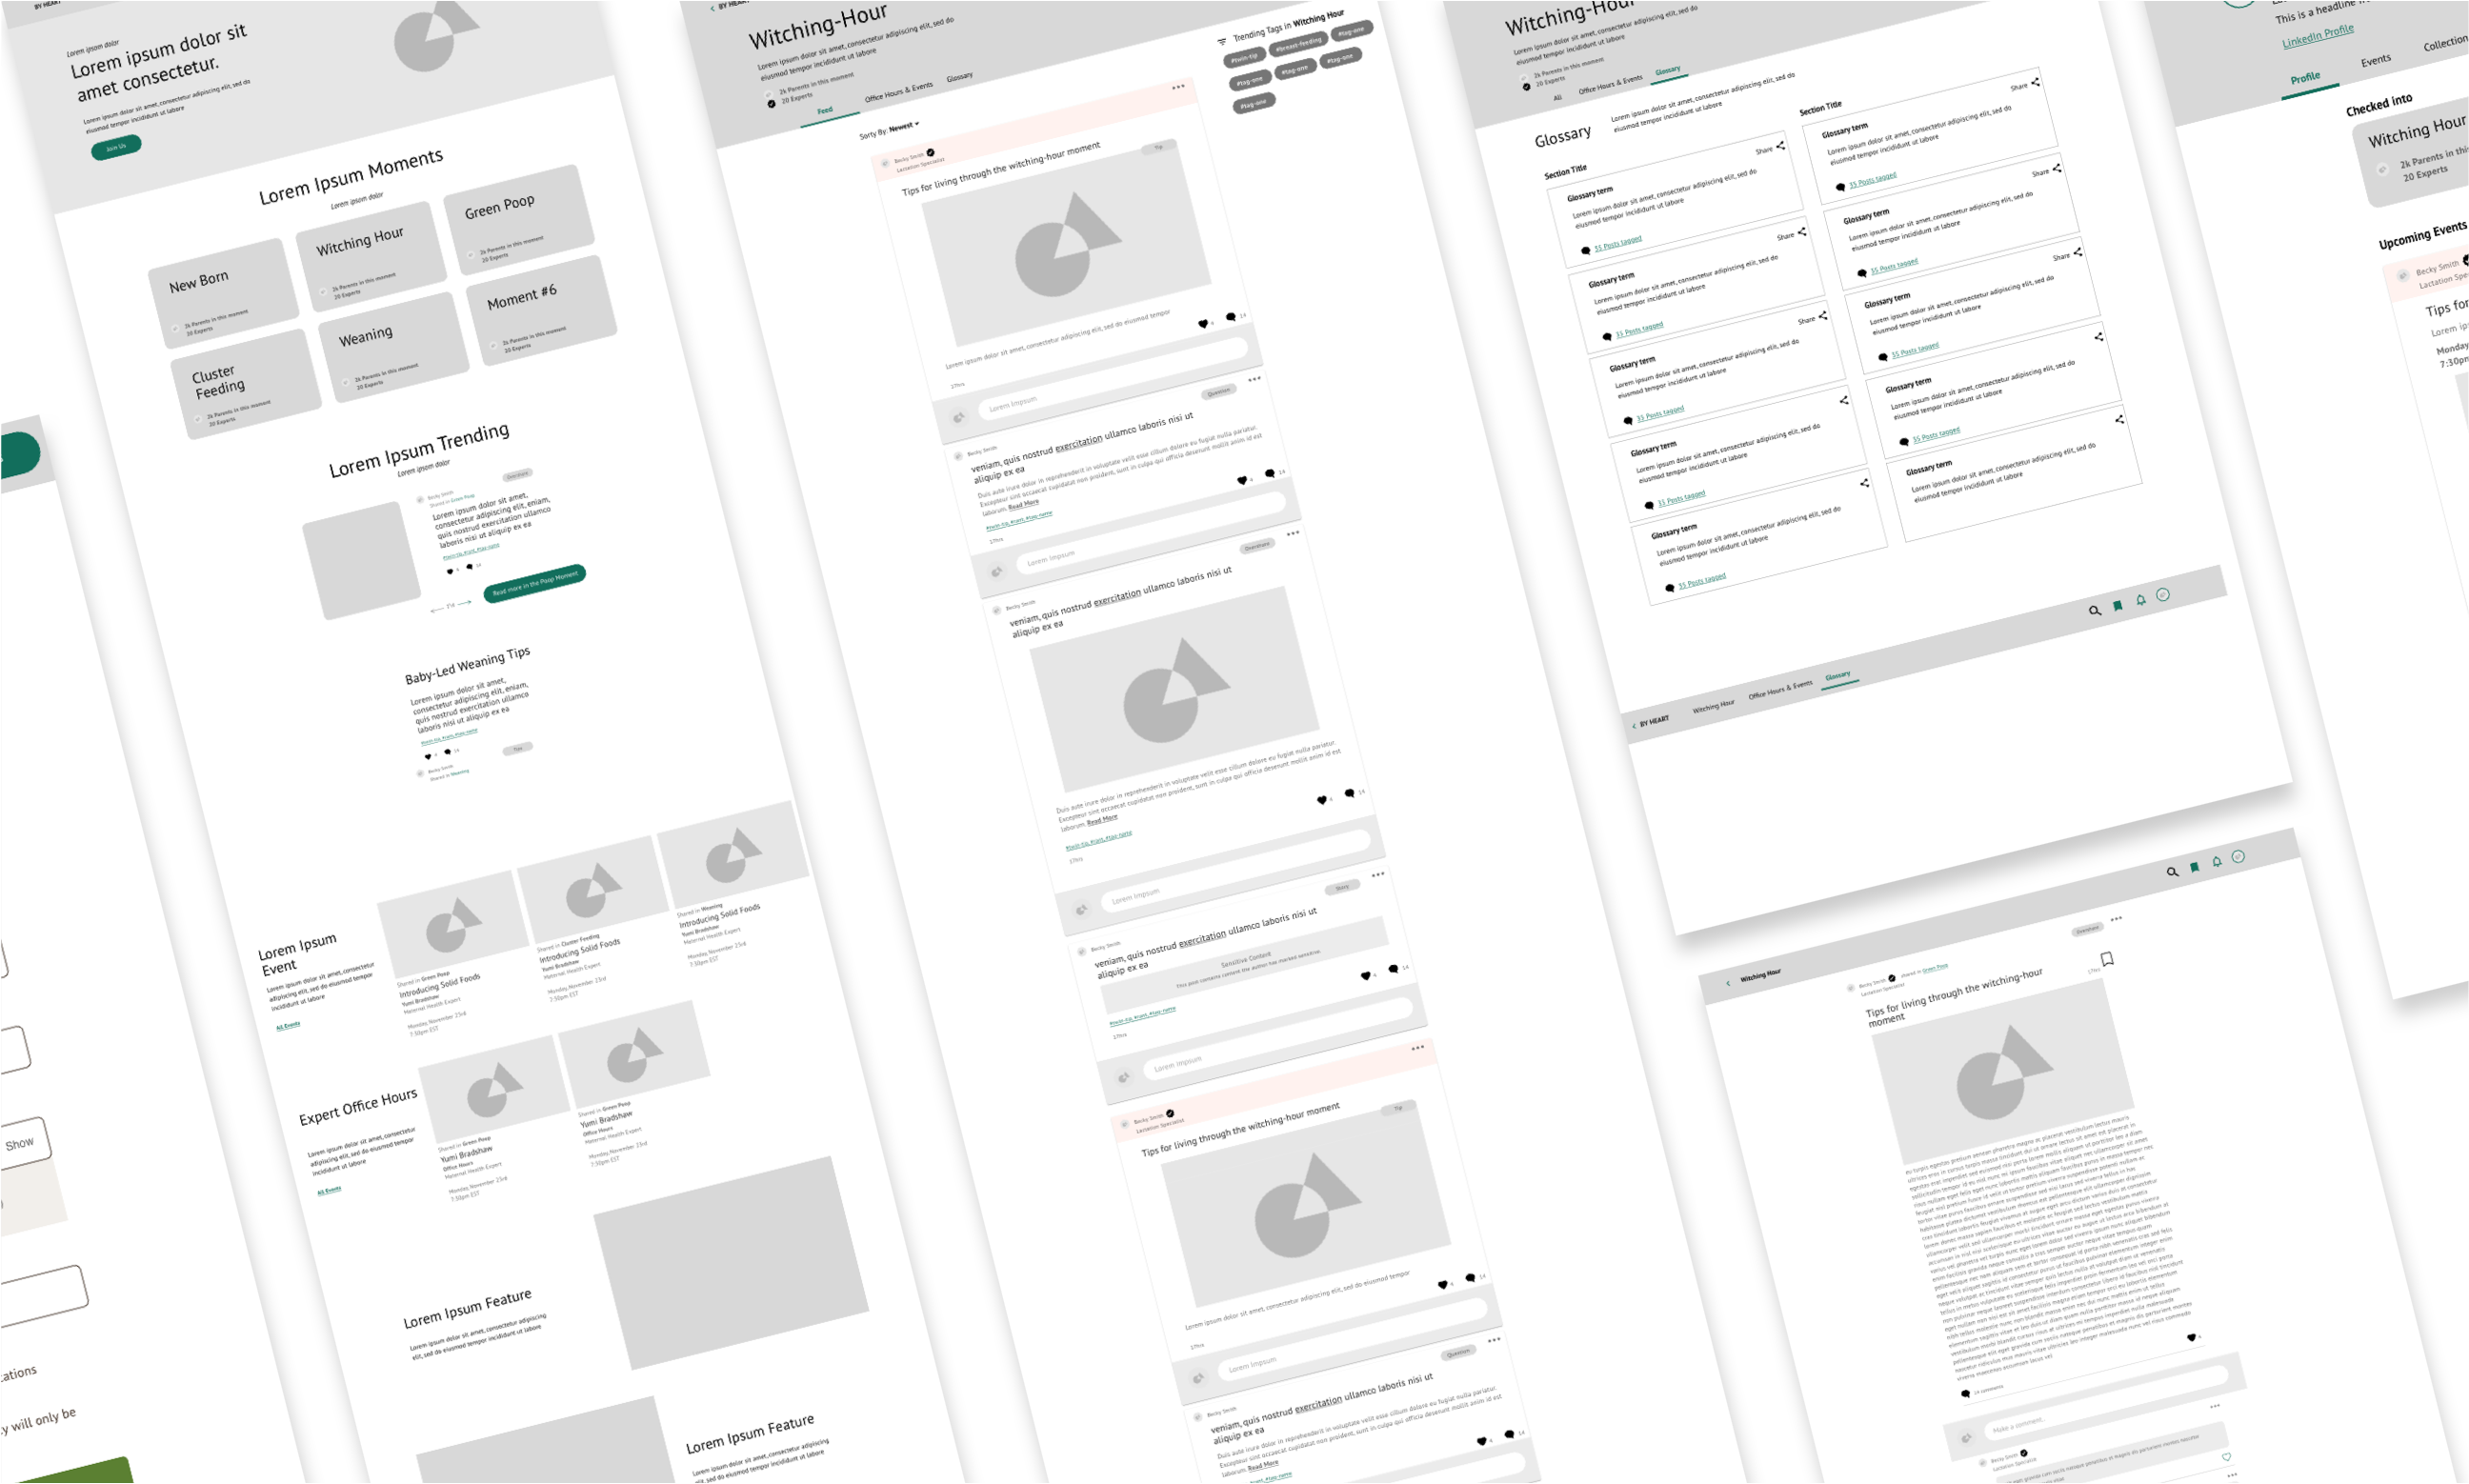 Collection of wireframes from byheart cluster.